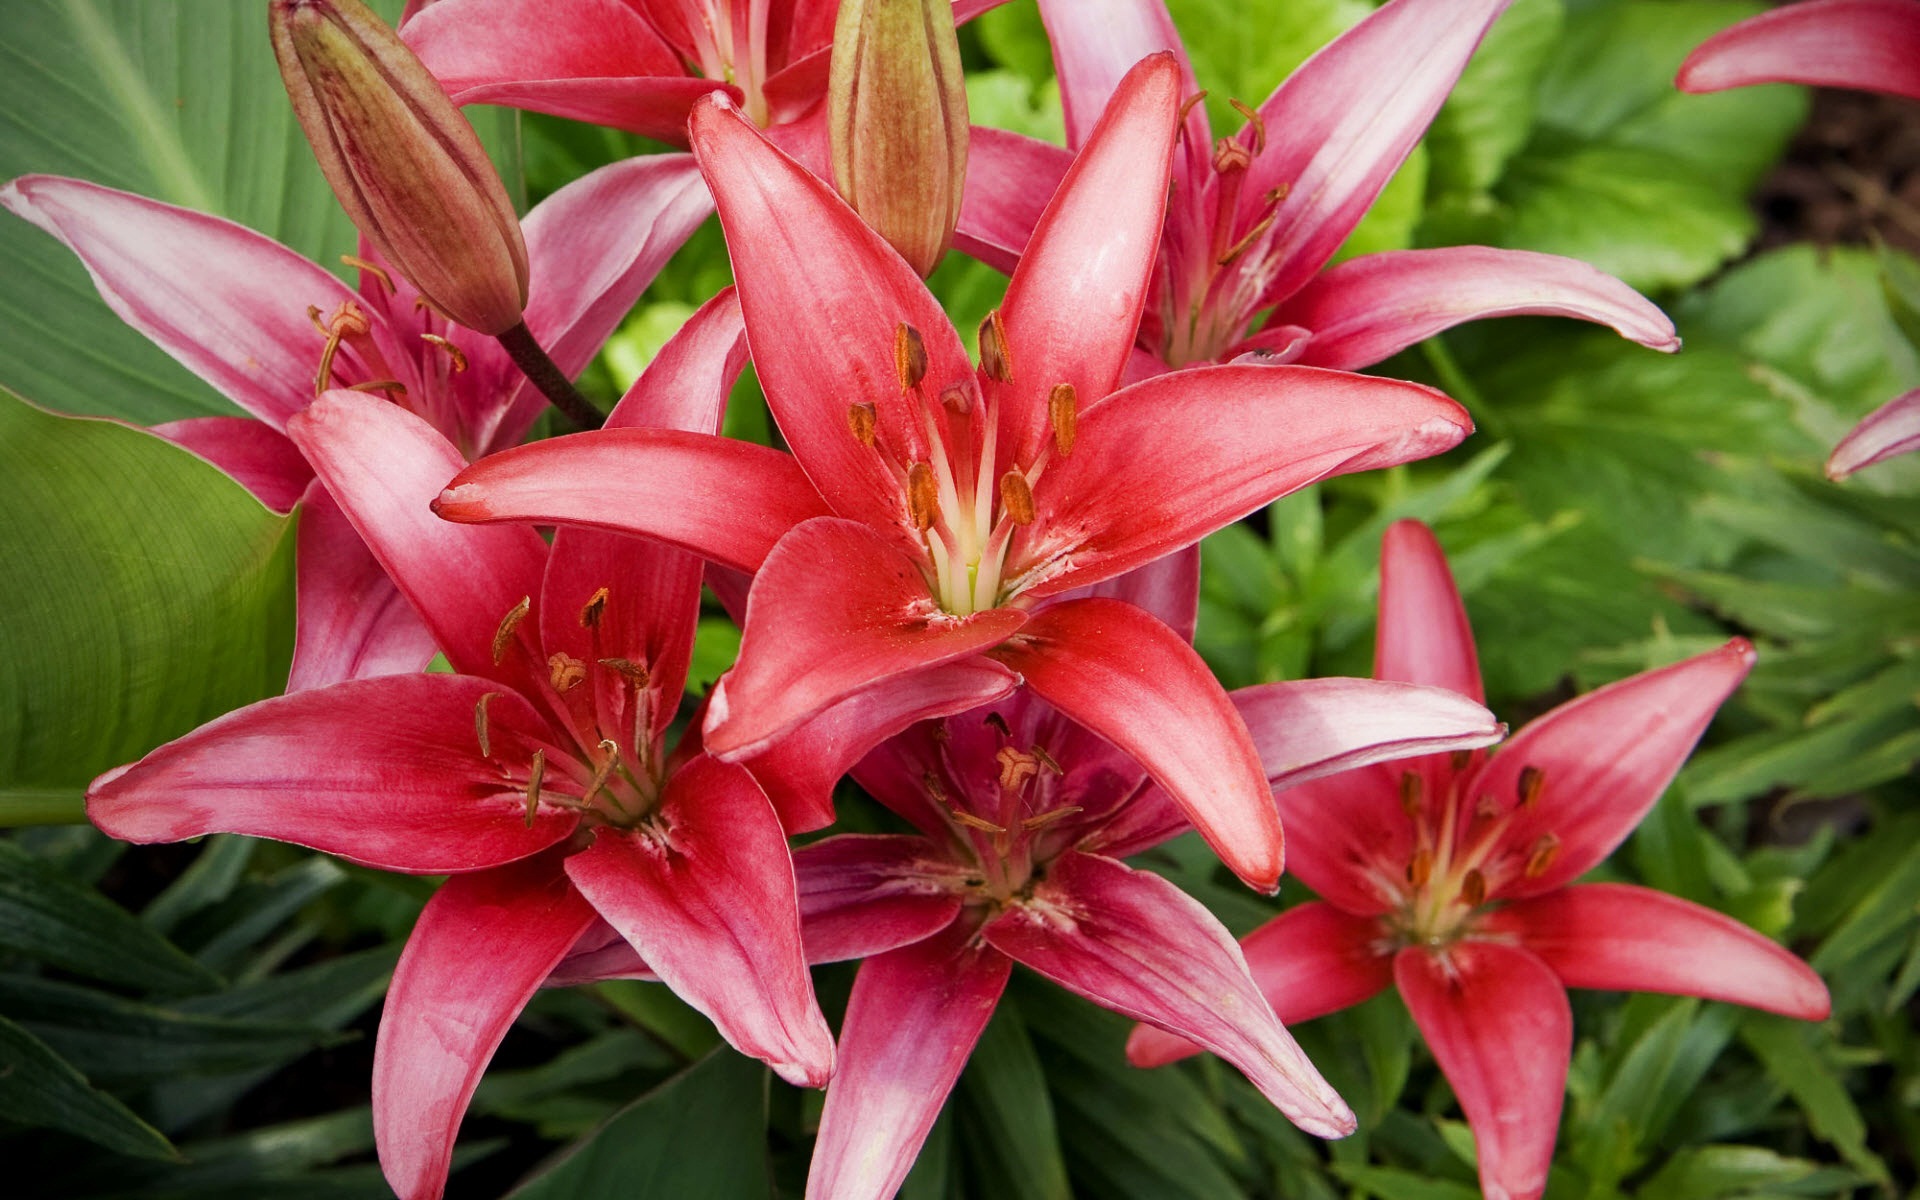 Wallpaper Of Flowers Red Lilies World